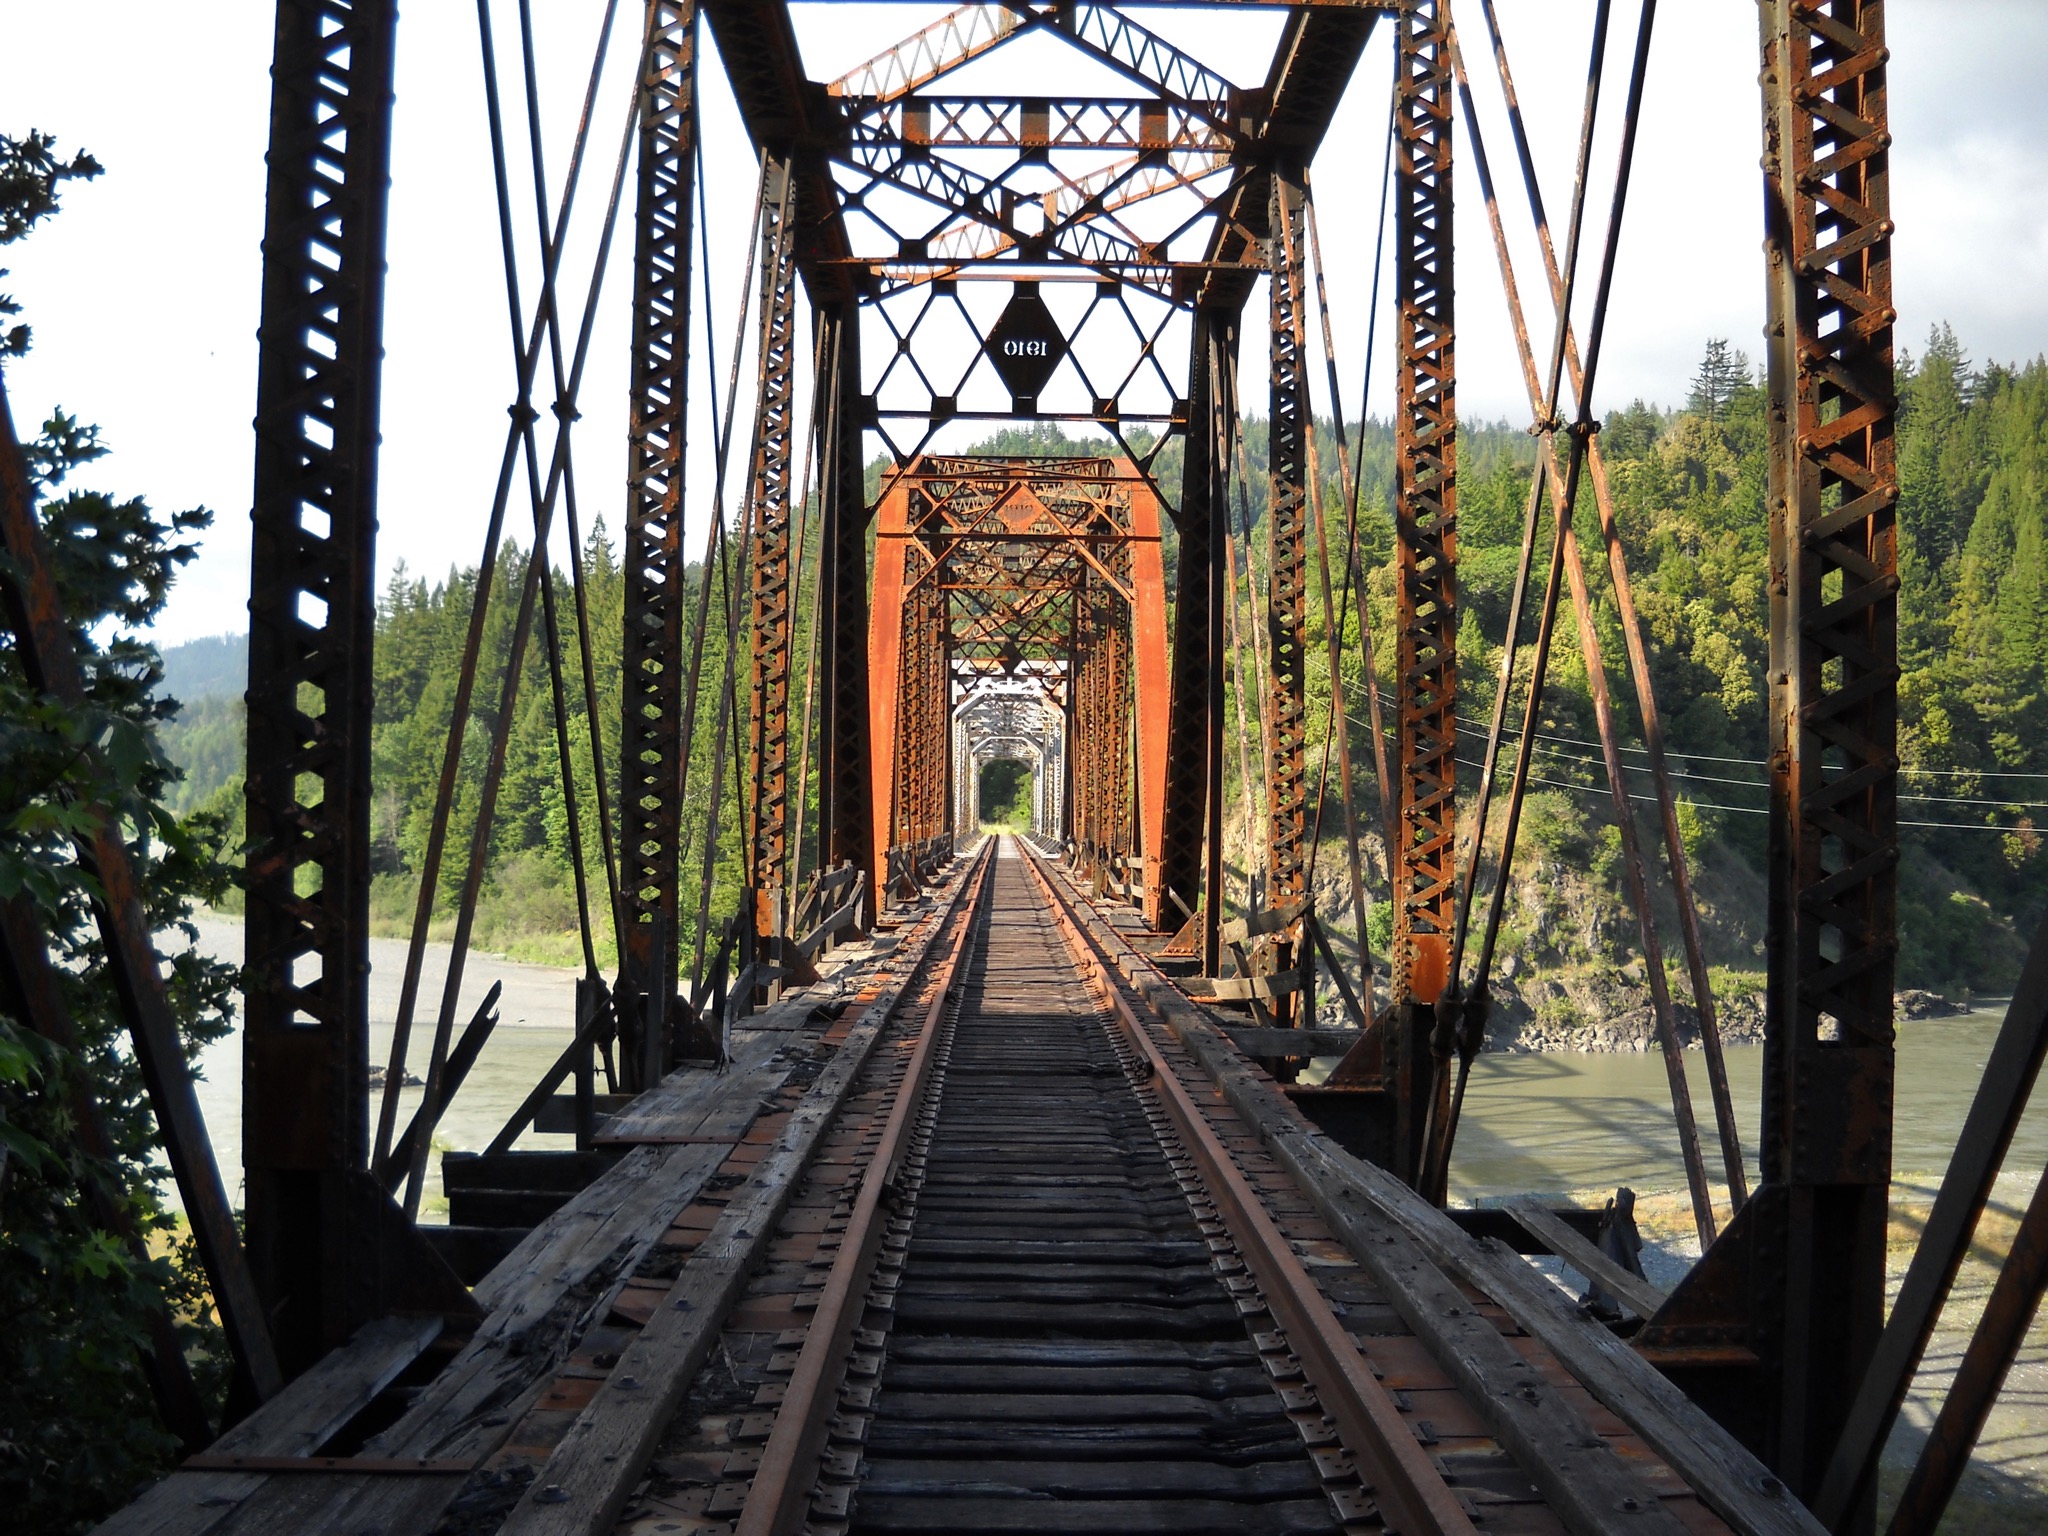 Dying North Coast railroad could become world-class hiking trail